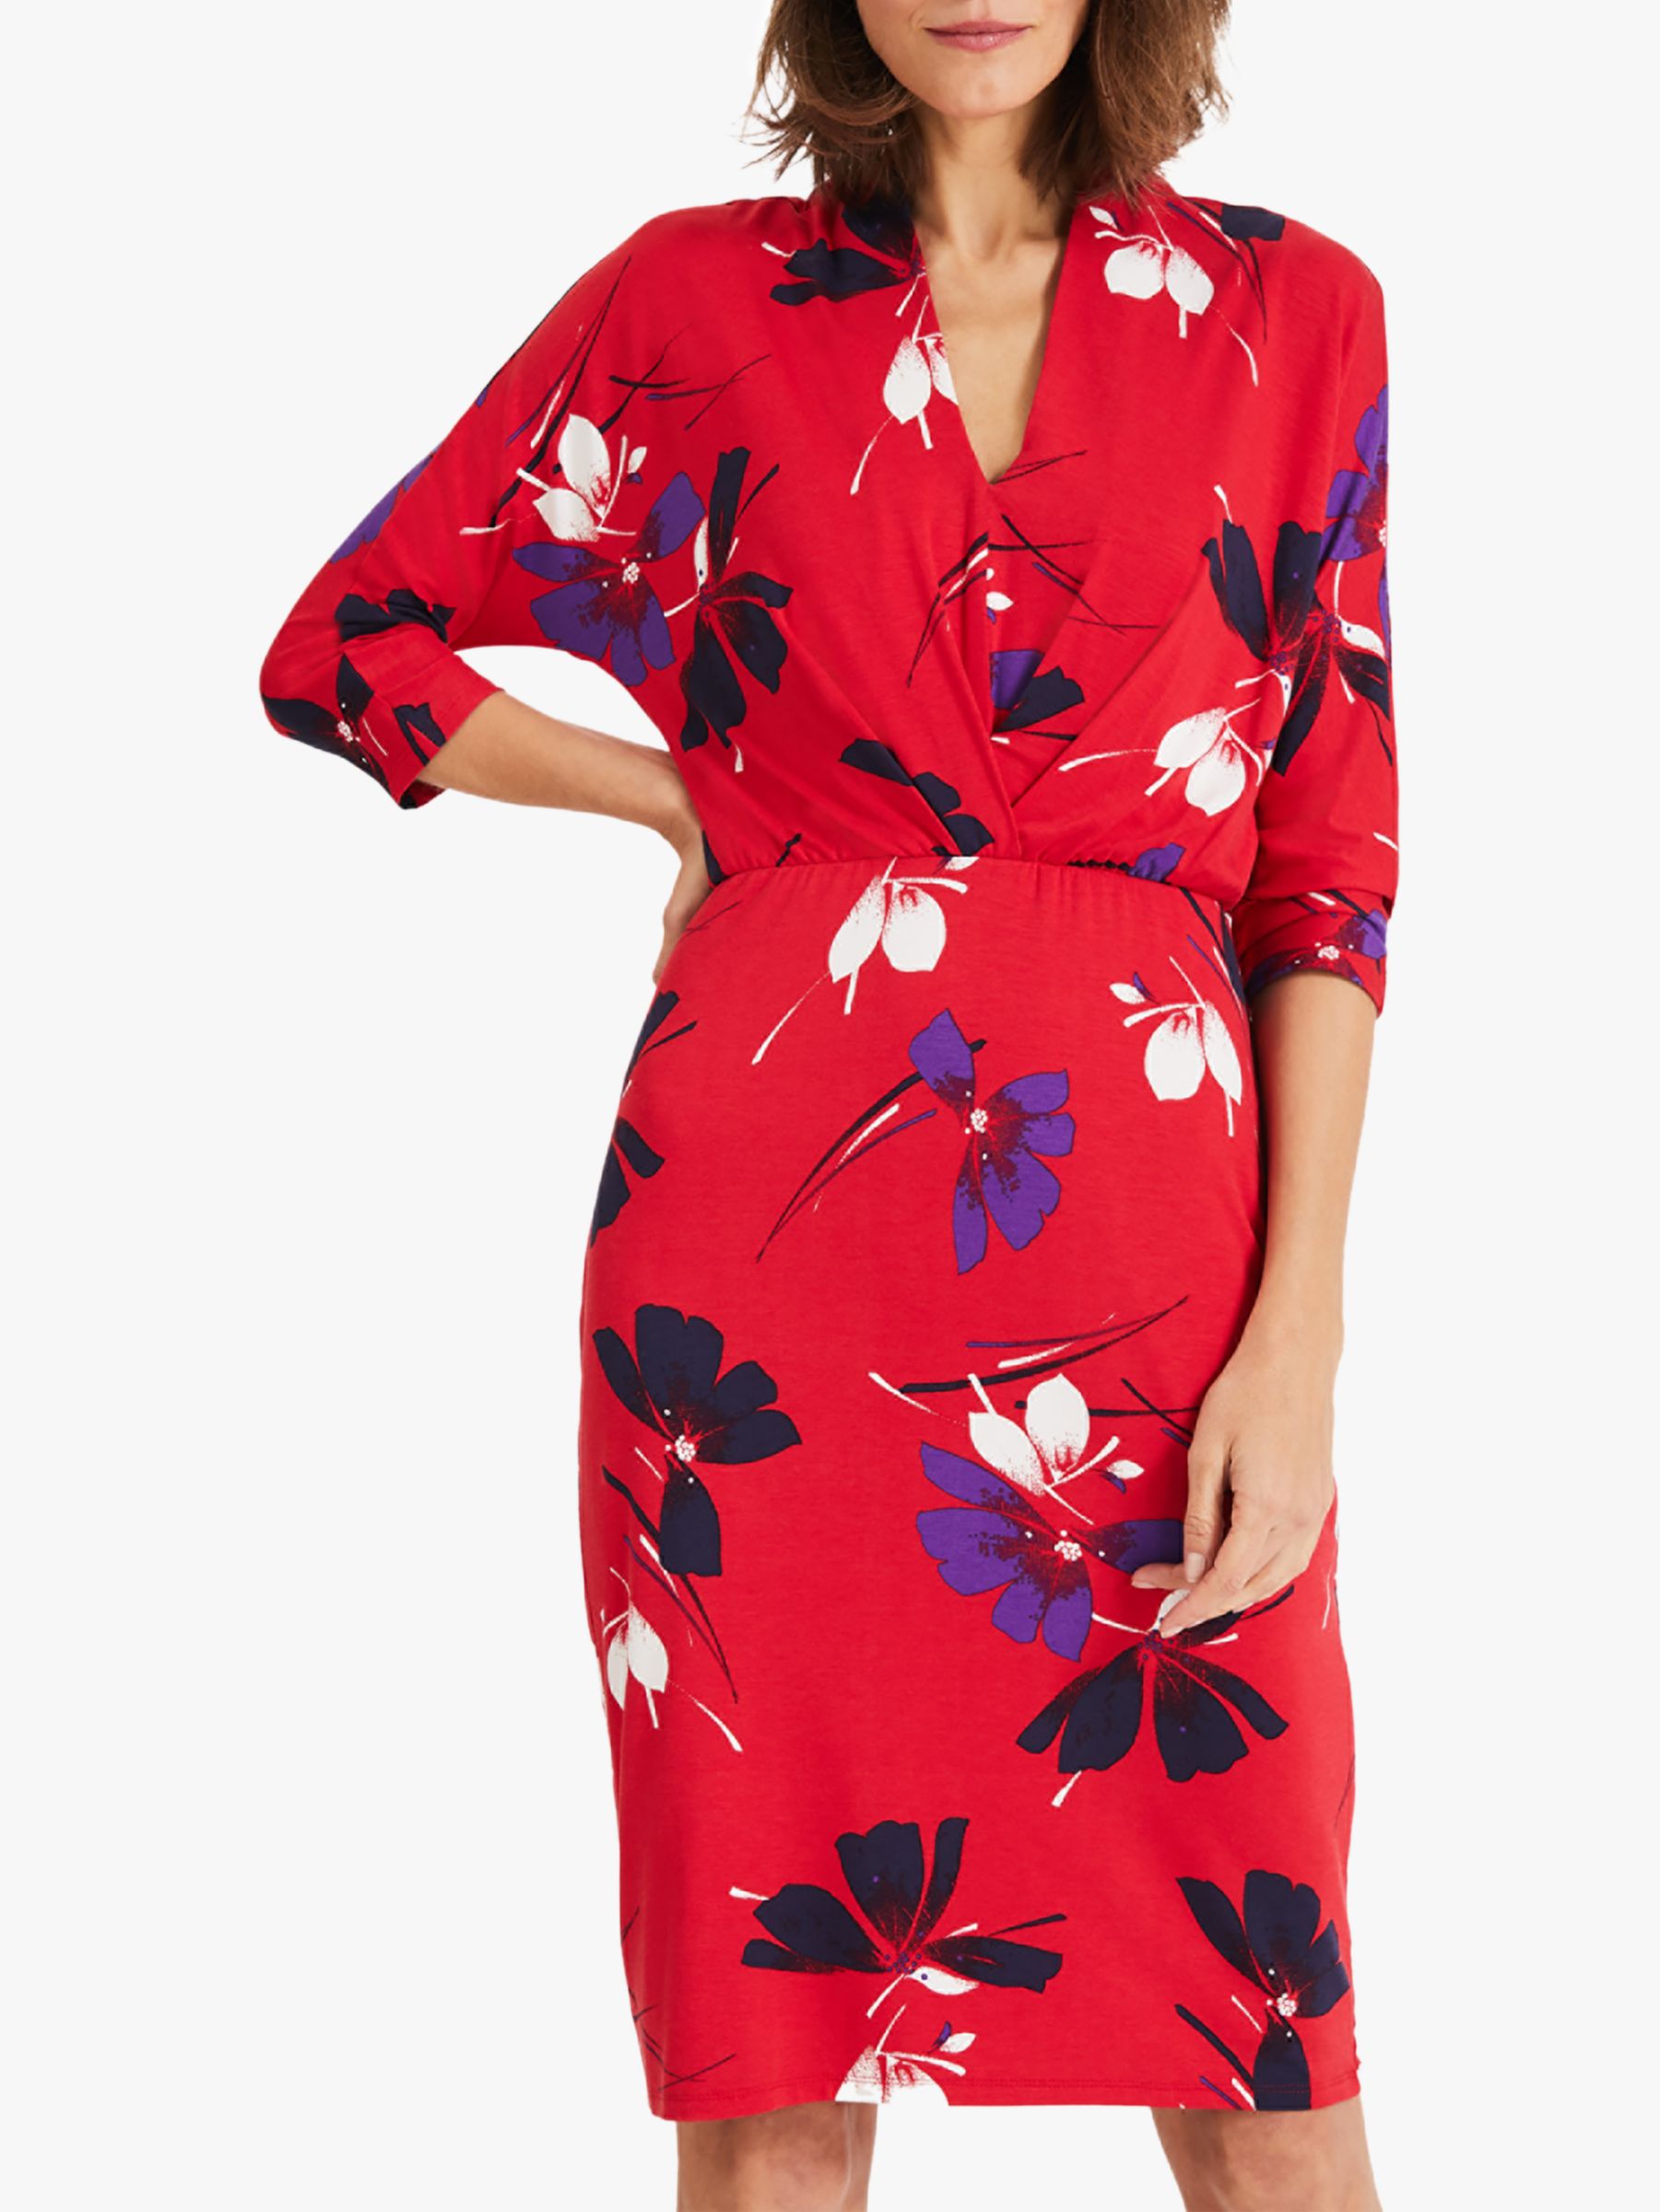 Phase Eight Harper Floral Print Dress, Red